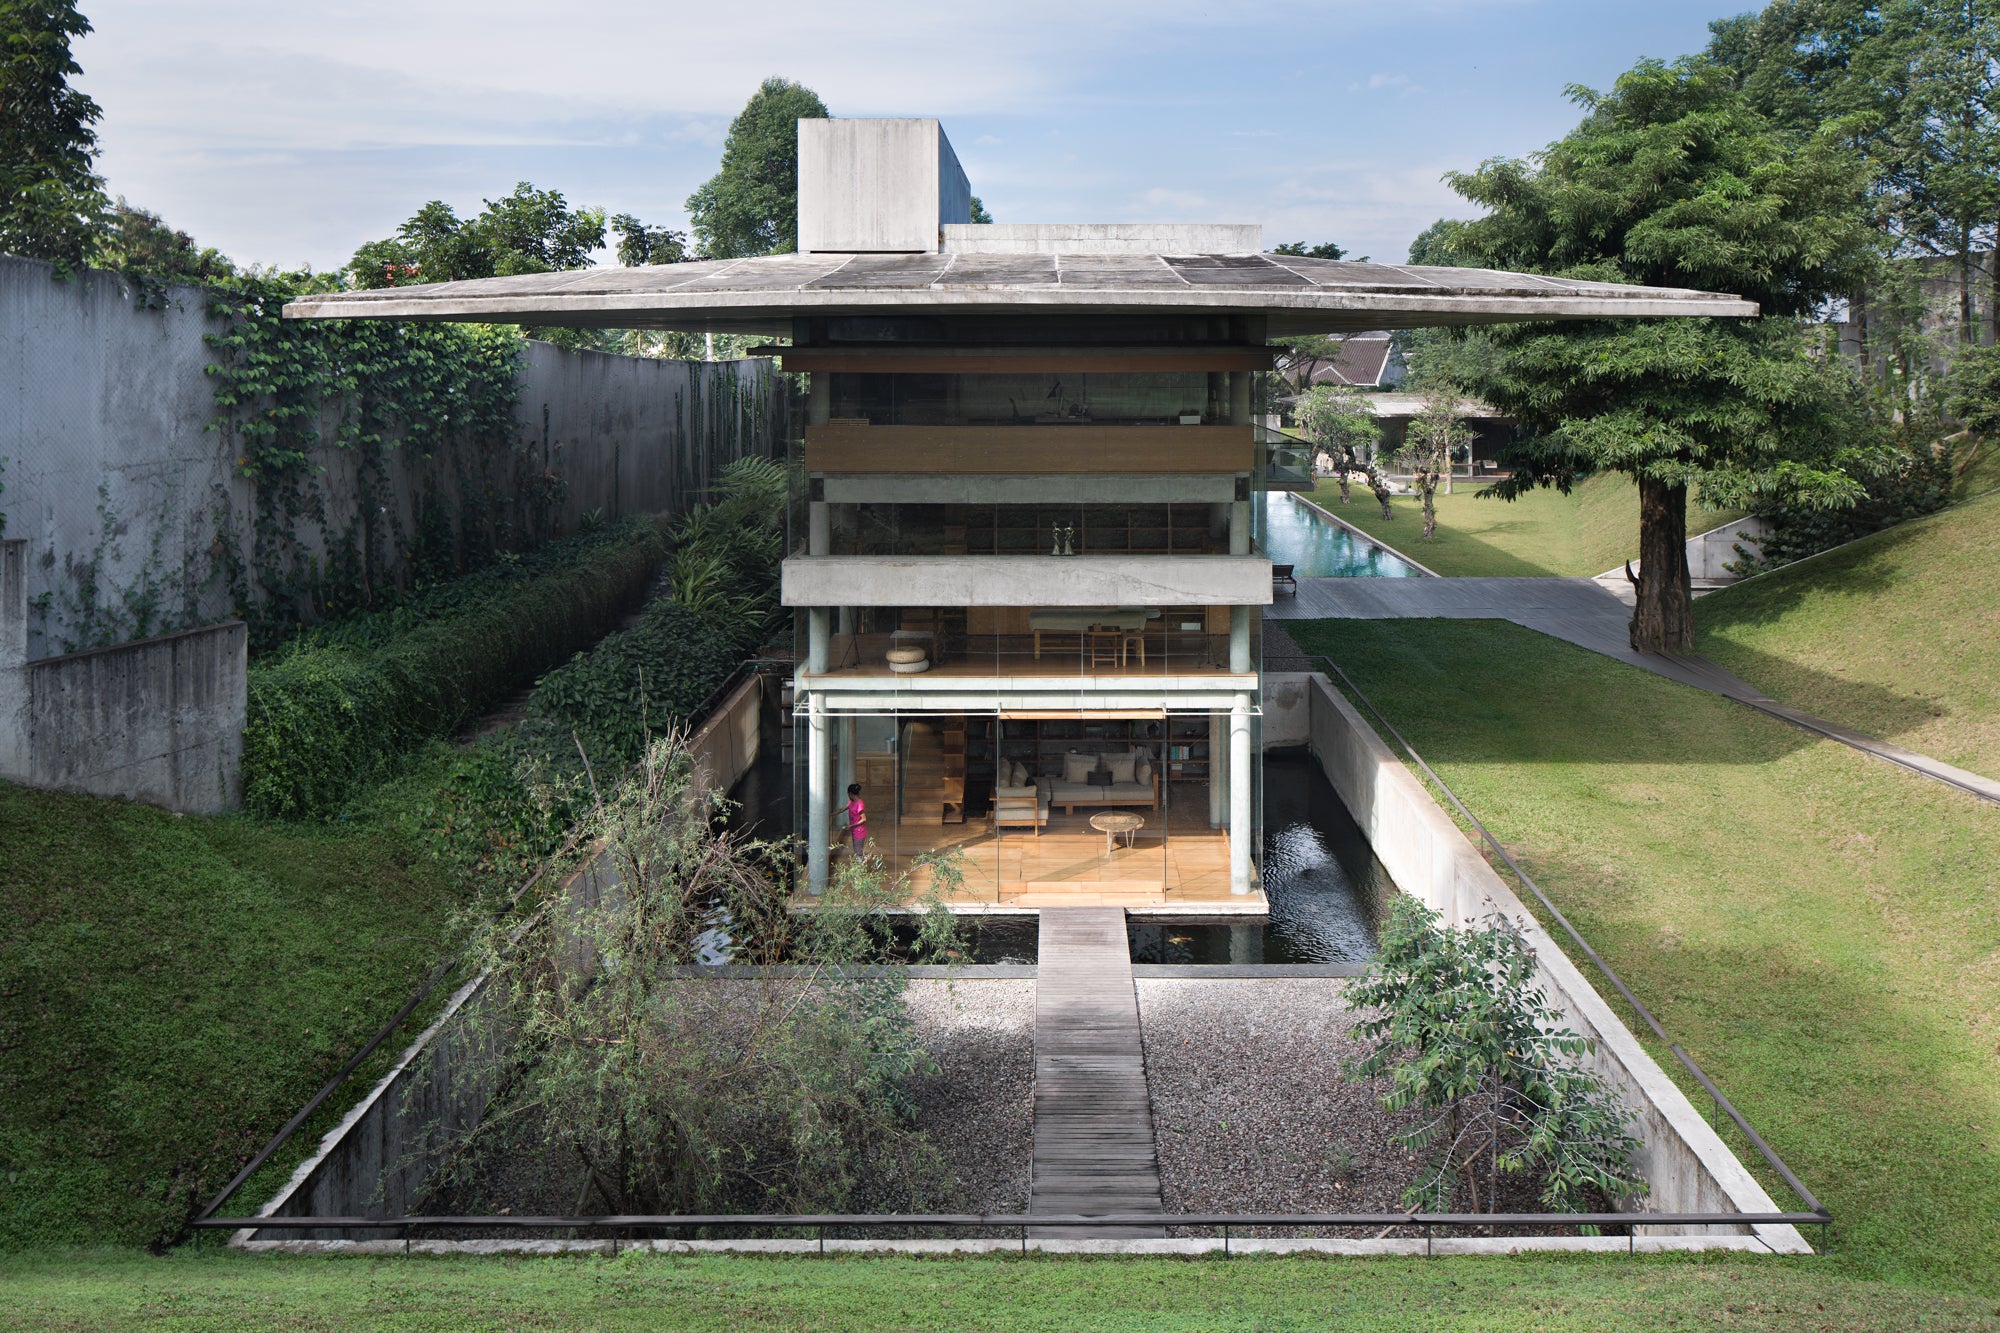 Andra Matin's Giant Concrete Roof Covers A Residence In Indonesia